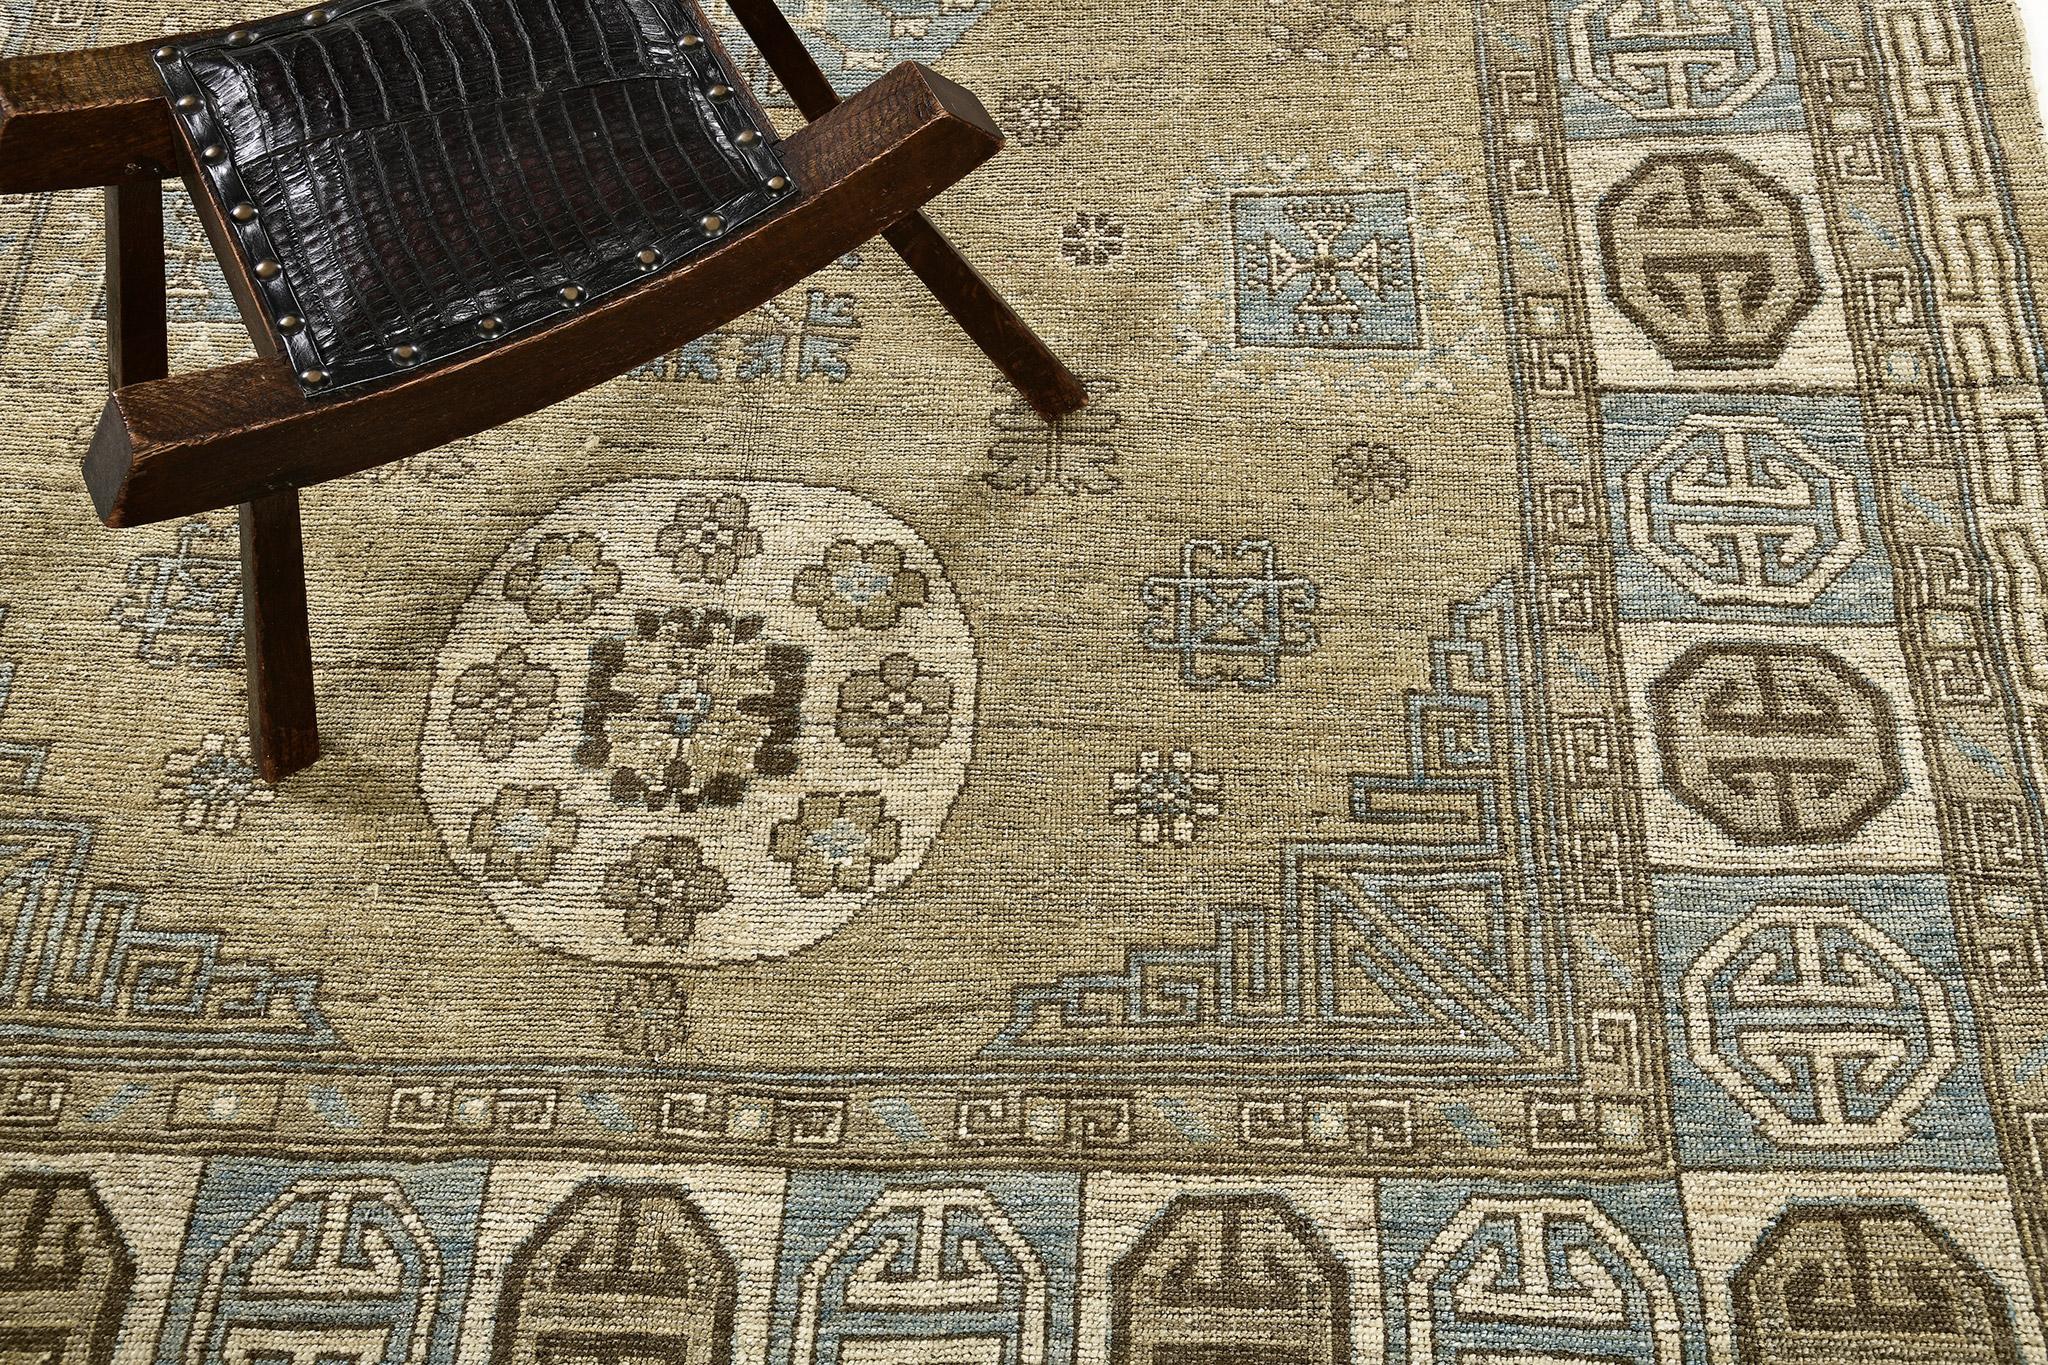 A warm and inviting Khotan Design revival rug that beautifully embodies combining influences from Chinese, Persian and Turkish designs. The abrashed tan field is covered with distinctive ornate stylish patterns enclosed by alternating gul border